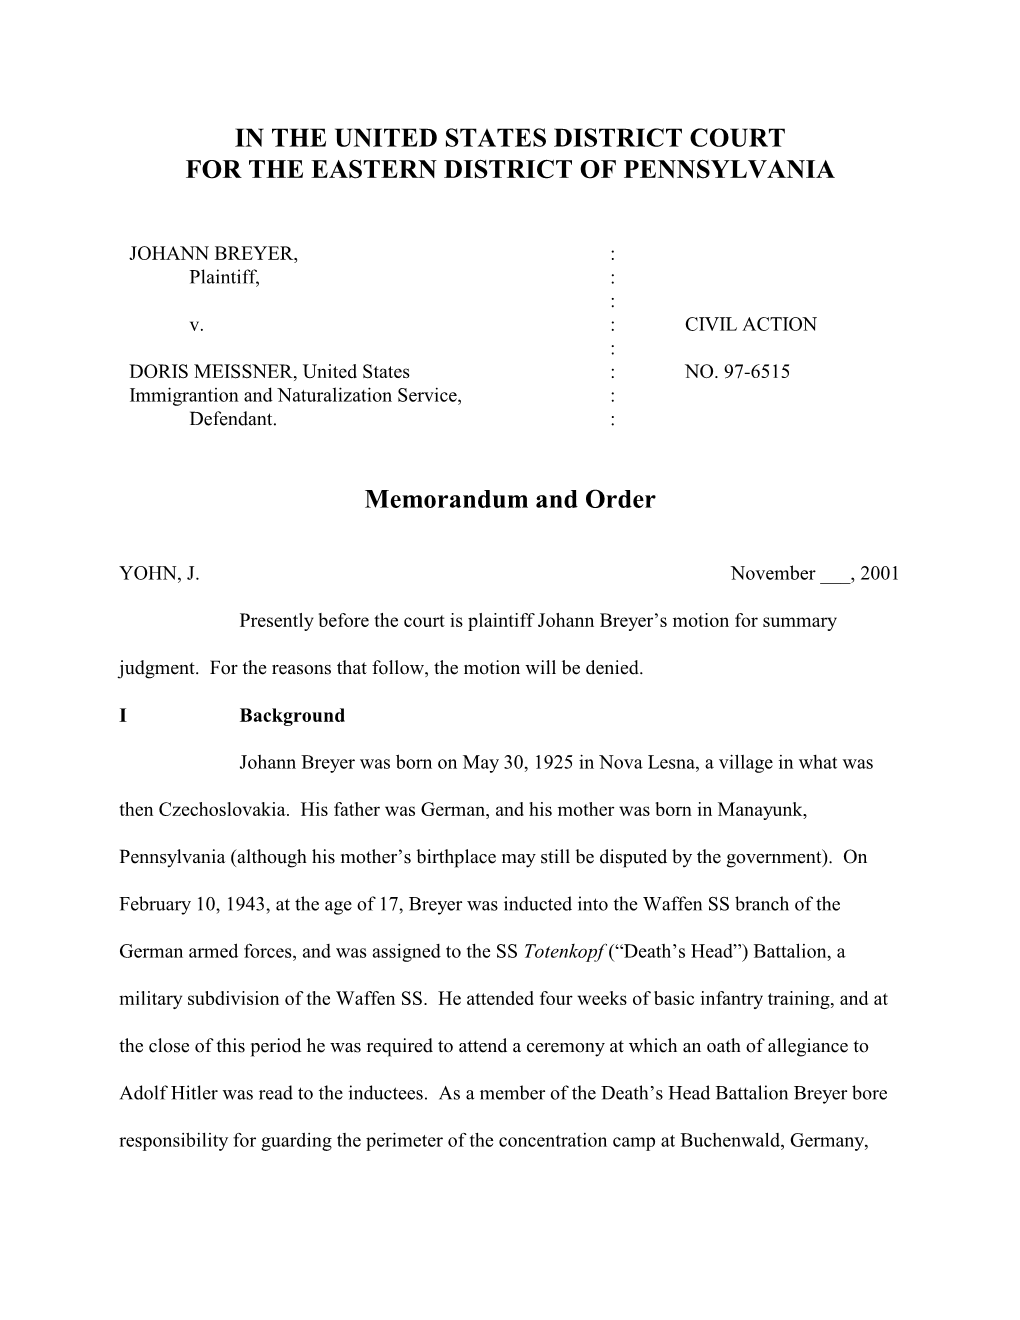 IN the UNITED STATES DISTRICT COURT for the EASTERN DISTRICT of PENNSYLVANIA Memorandum and Order